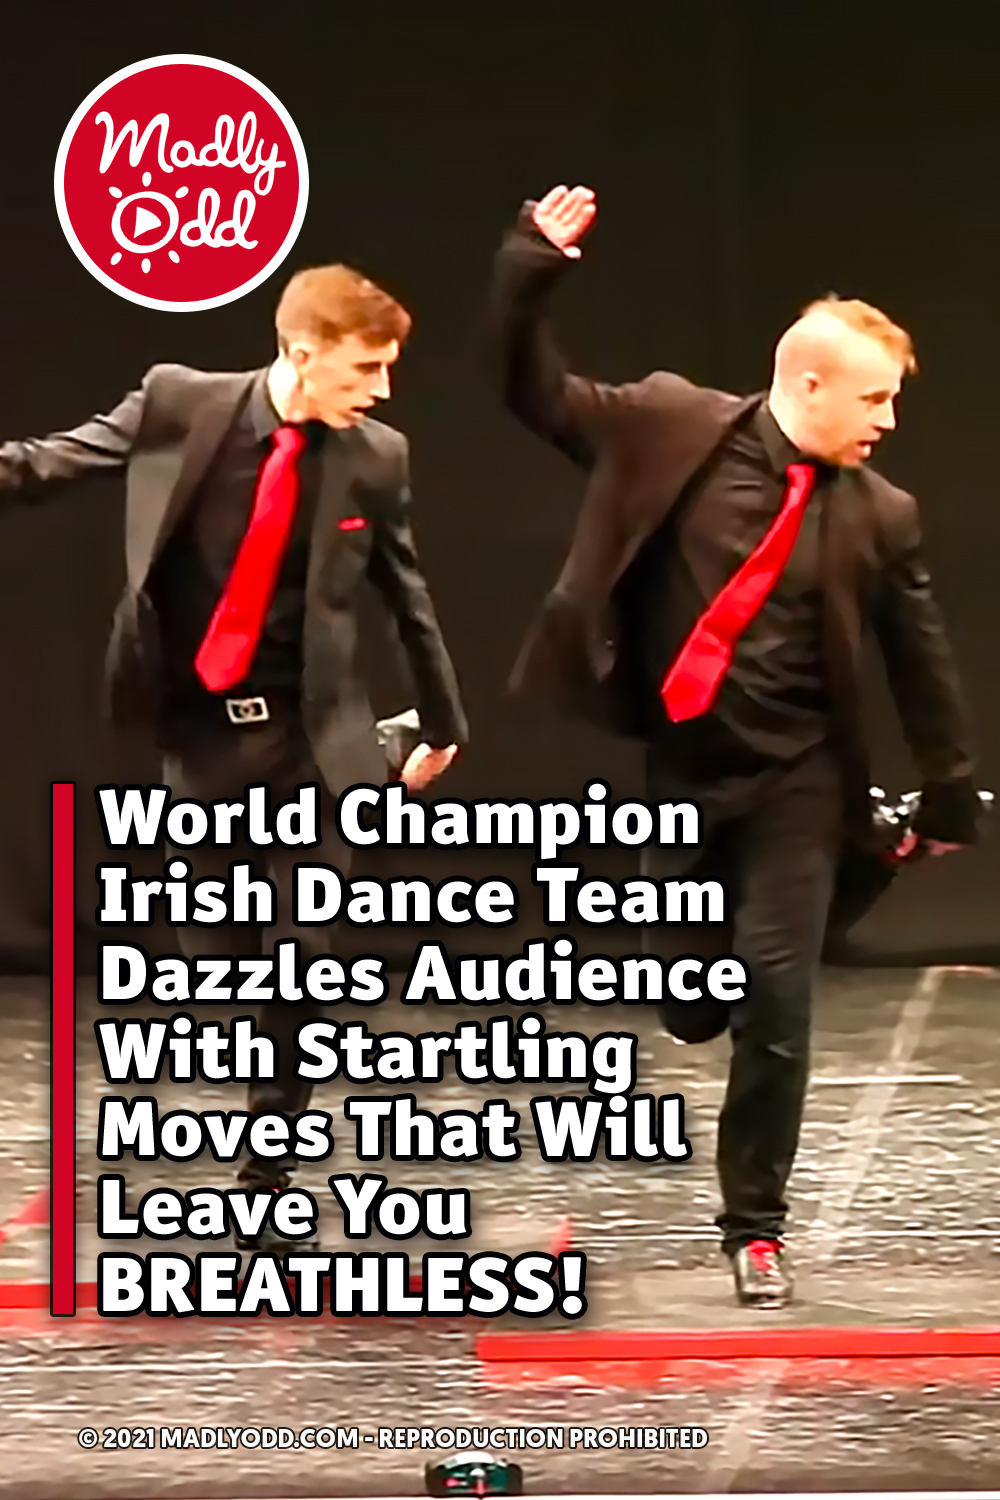 World Champion Irish Dance Team Dazzles Audience With Startling Moves That Will Leave You BREATHLESS!